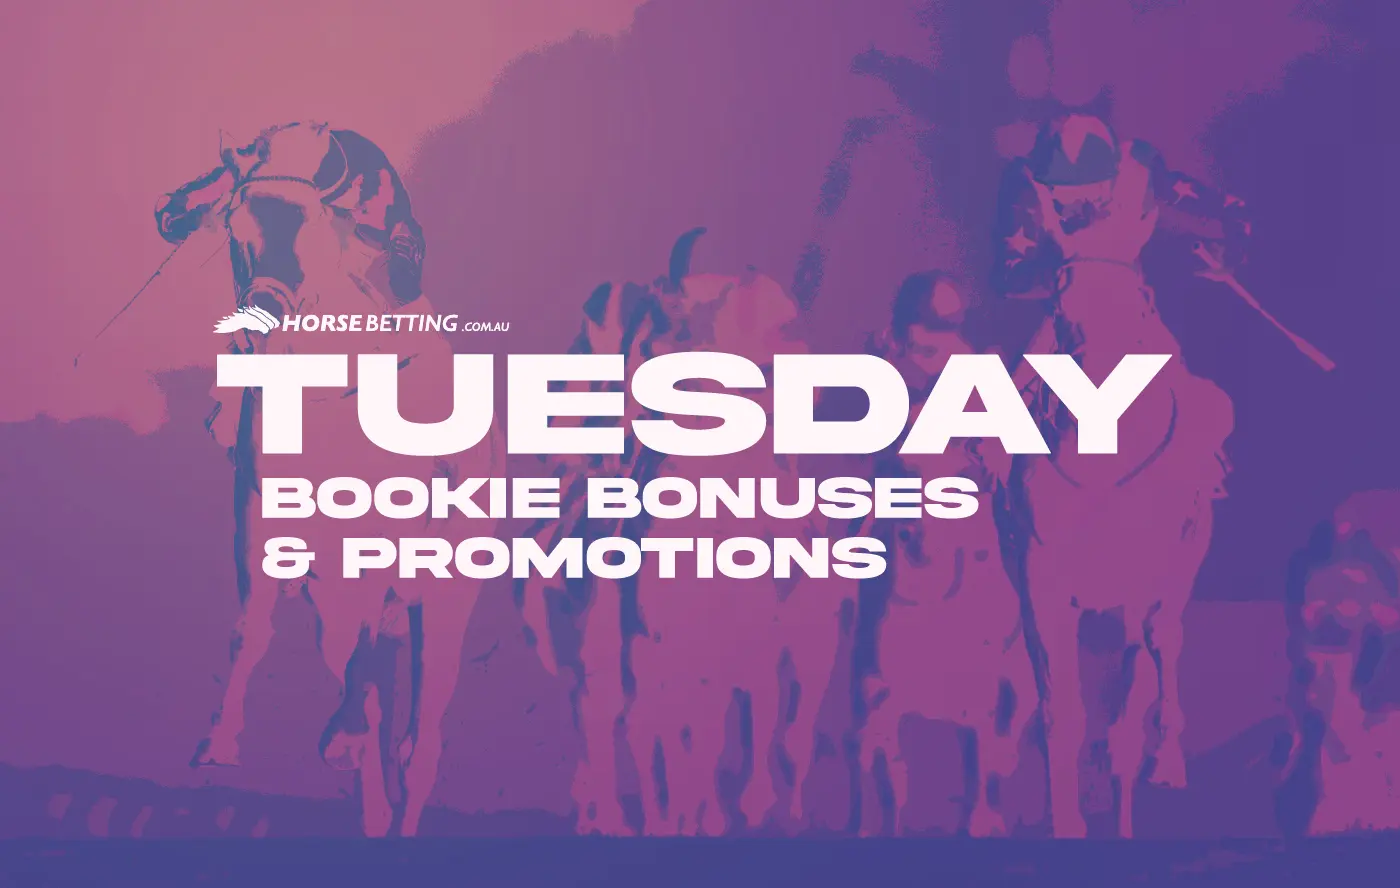 Tuesday horse racing bookie promos for March 19